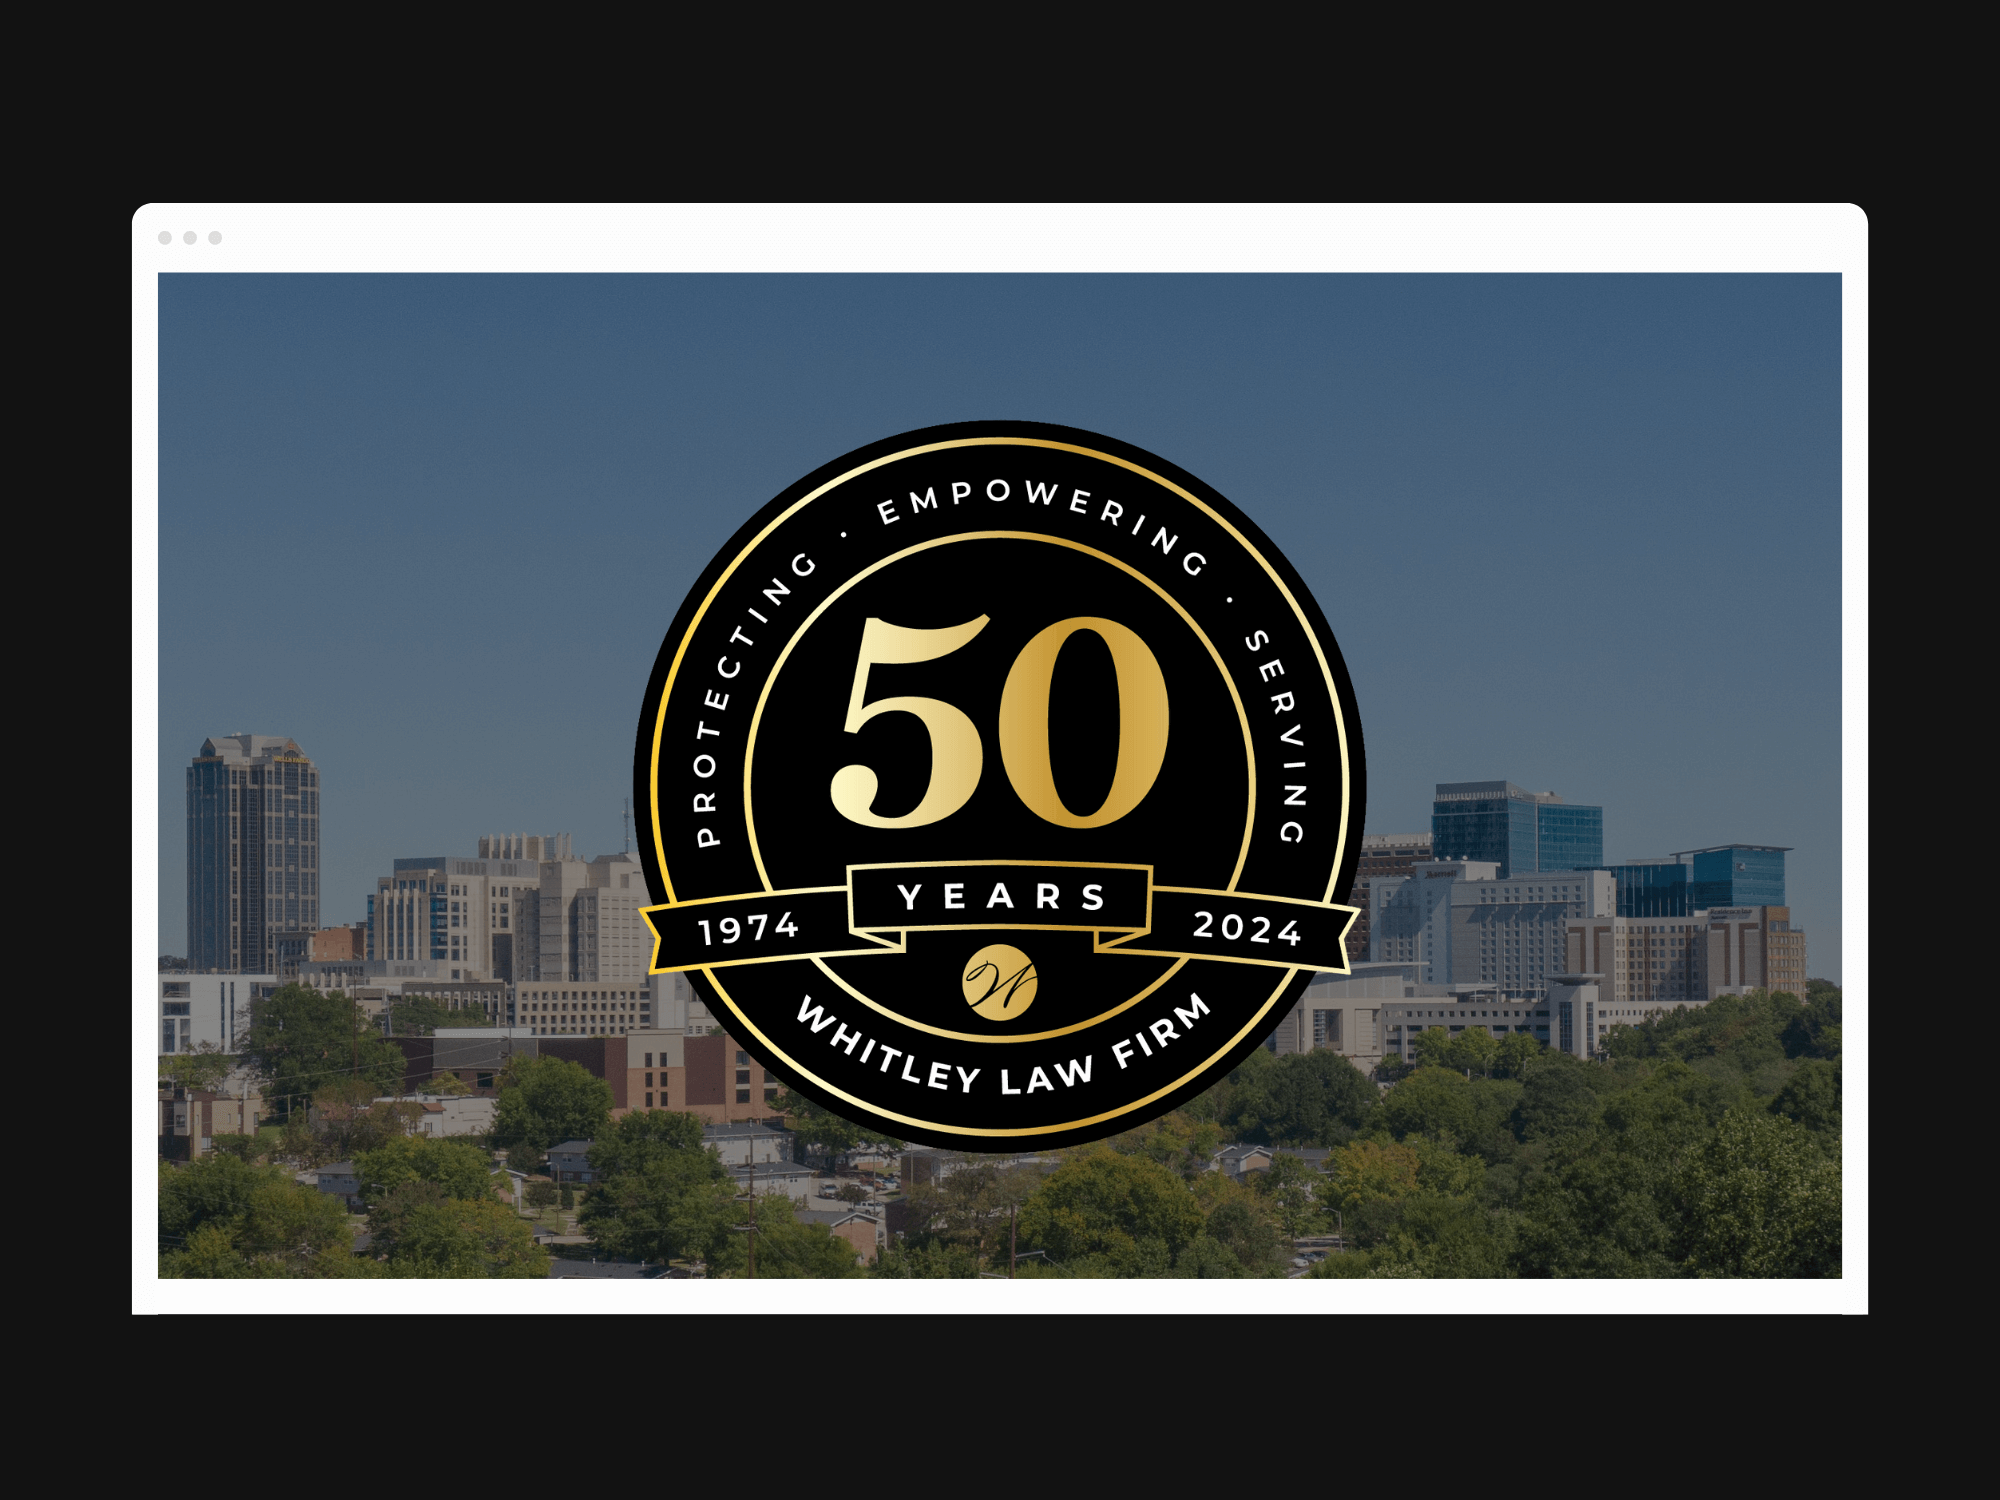 50th Anniversary badge for the Whitley Law Firm designed by Alexa B. Taylor